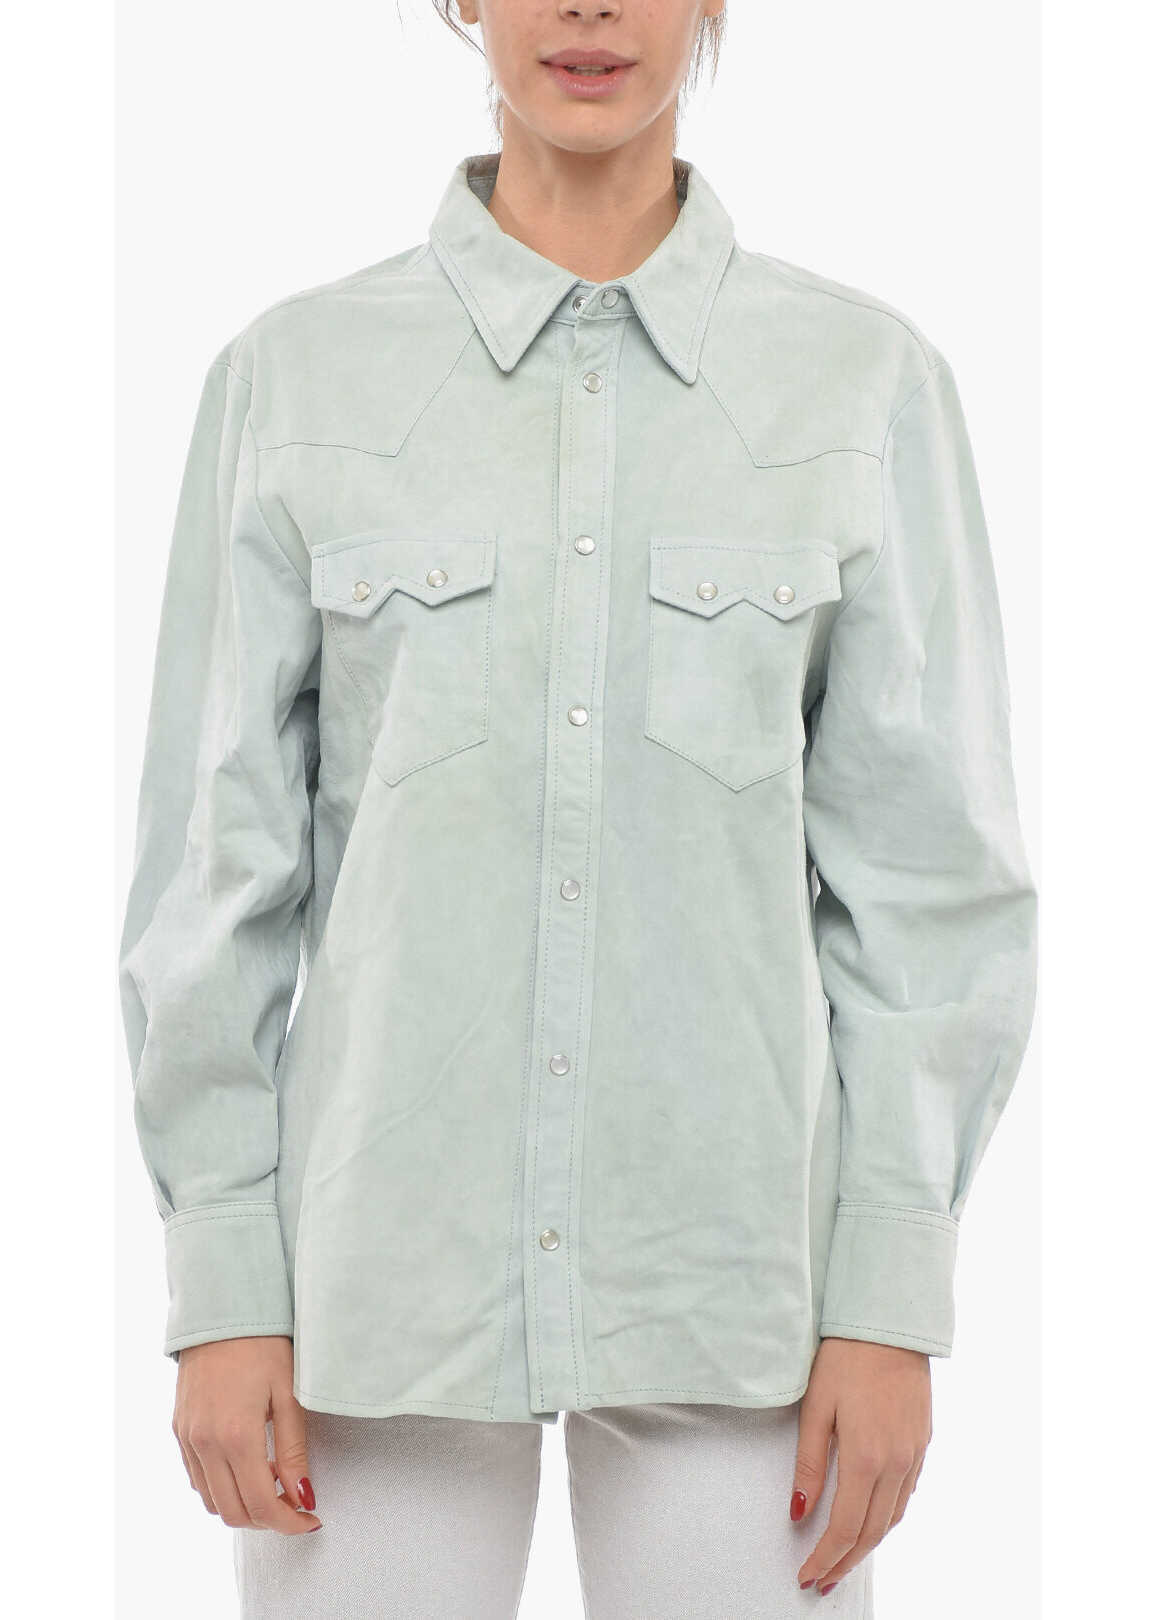 WASHINGTON DEE CEE Rodeo Wear Suede Shirt With Double Breast Pocket Light Blue